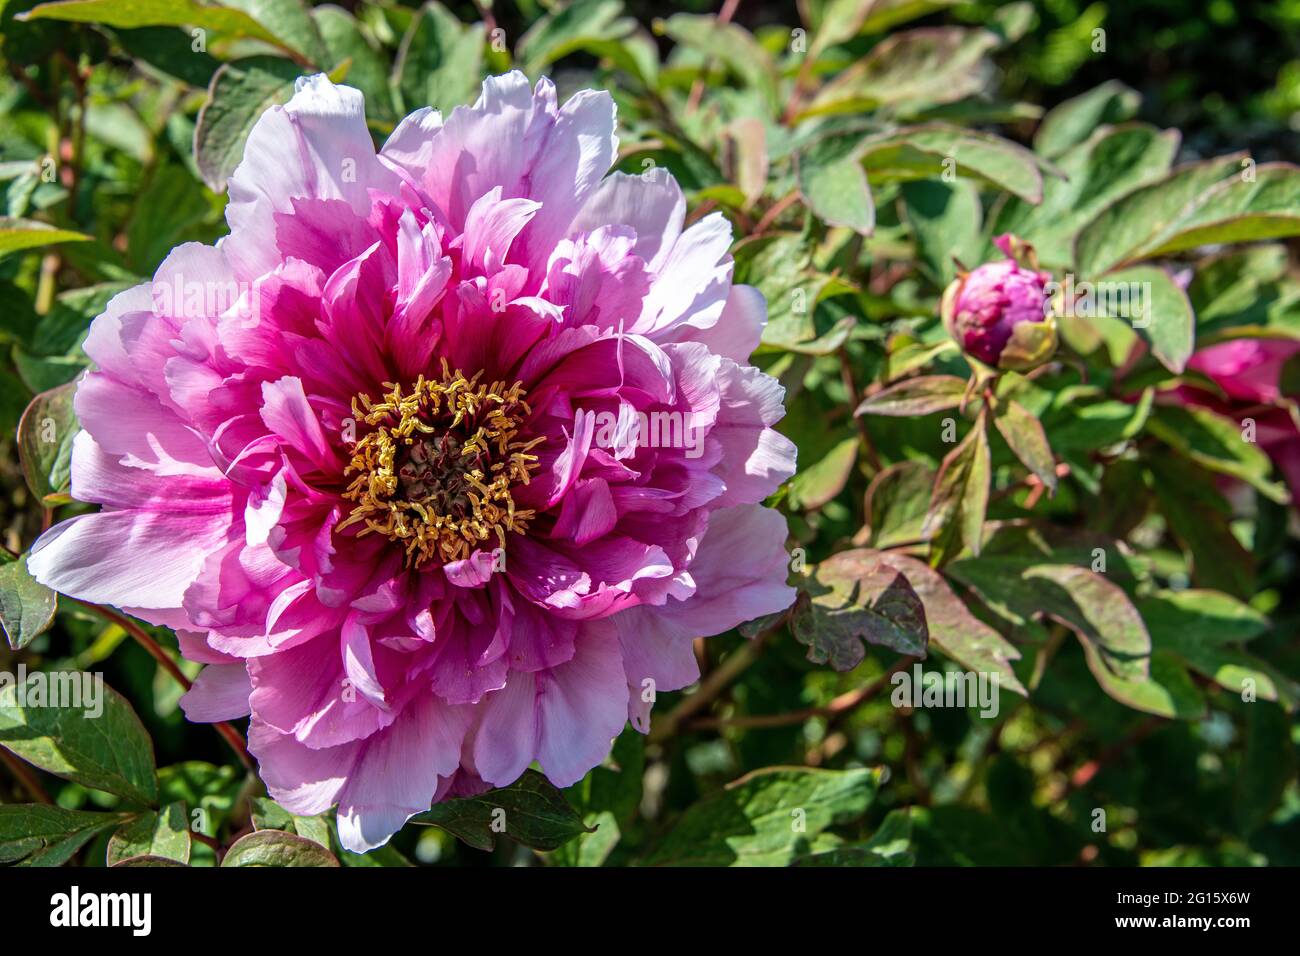 Above view of an open flower head of a paeonia in pink and white colors Stock Photo